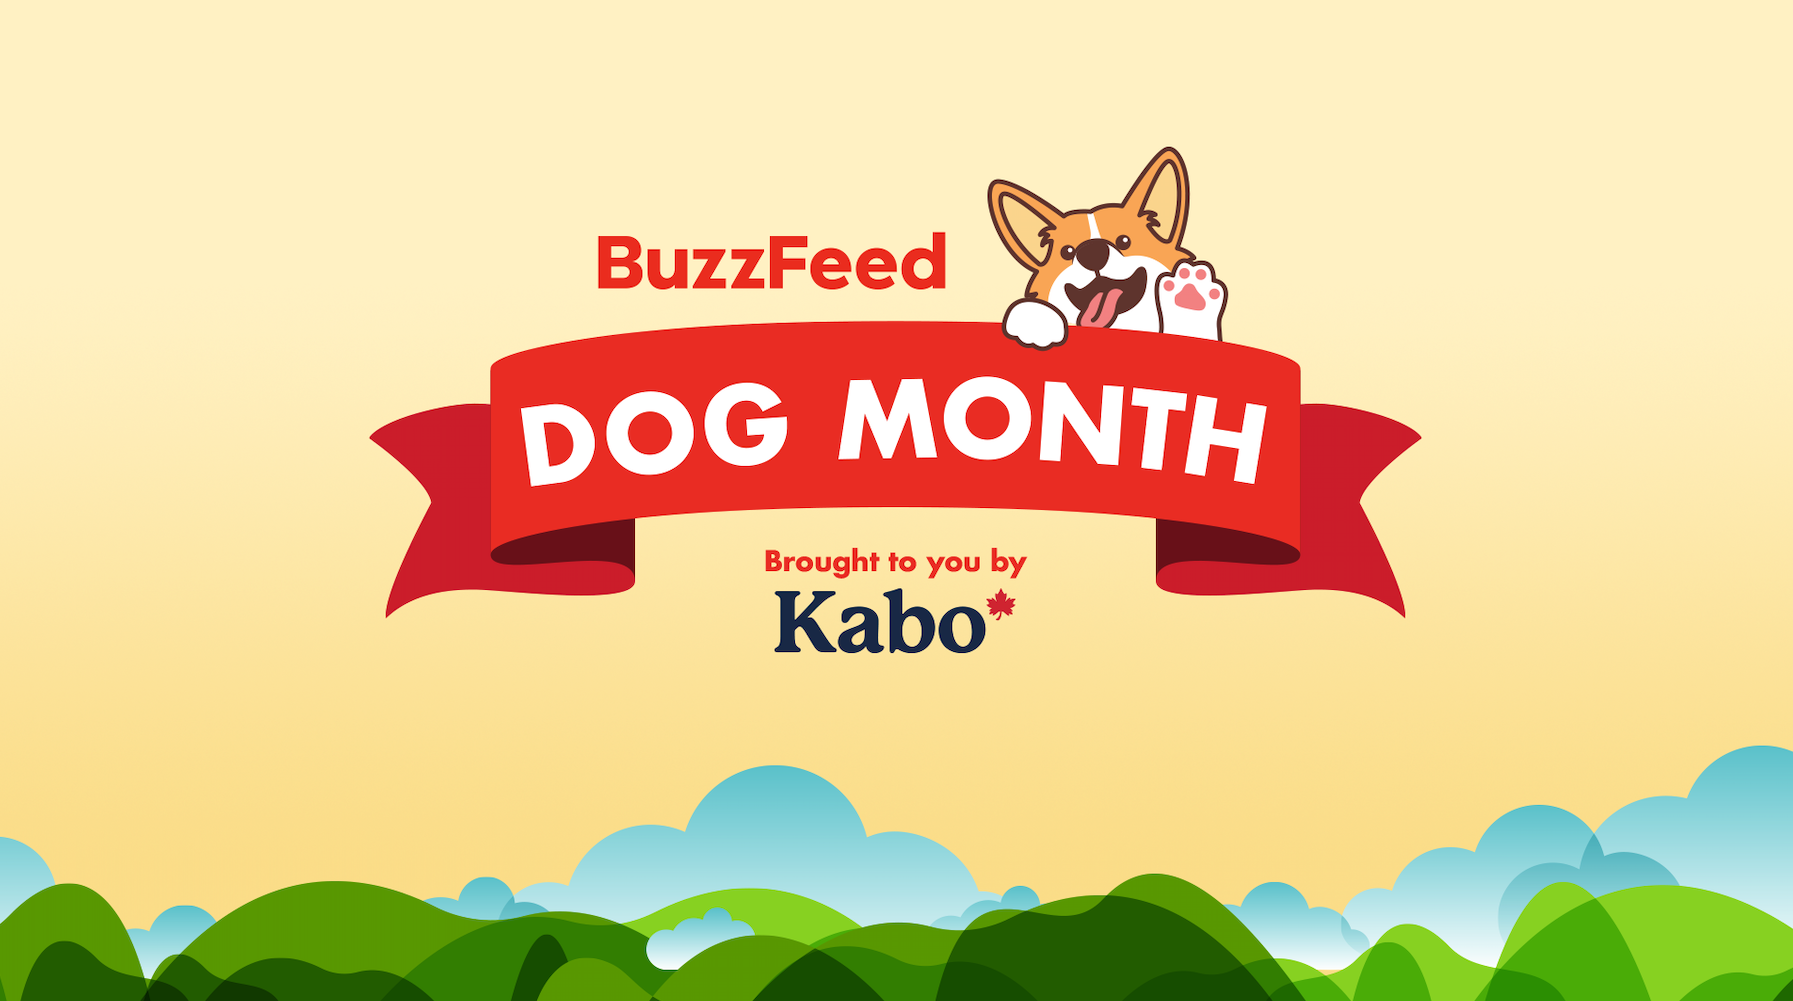 BuzzFeed Dog Month Brought to you by Kabo